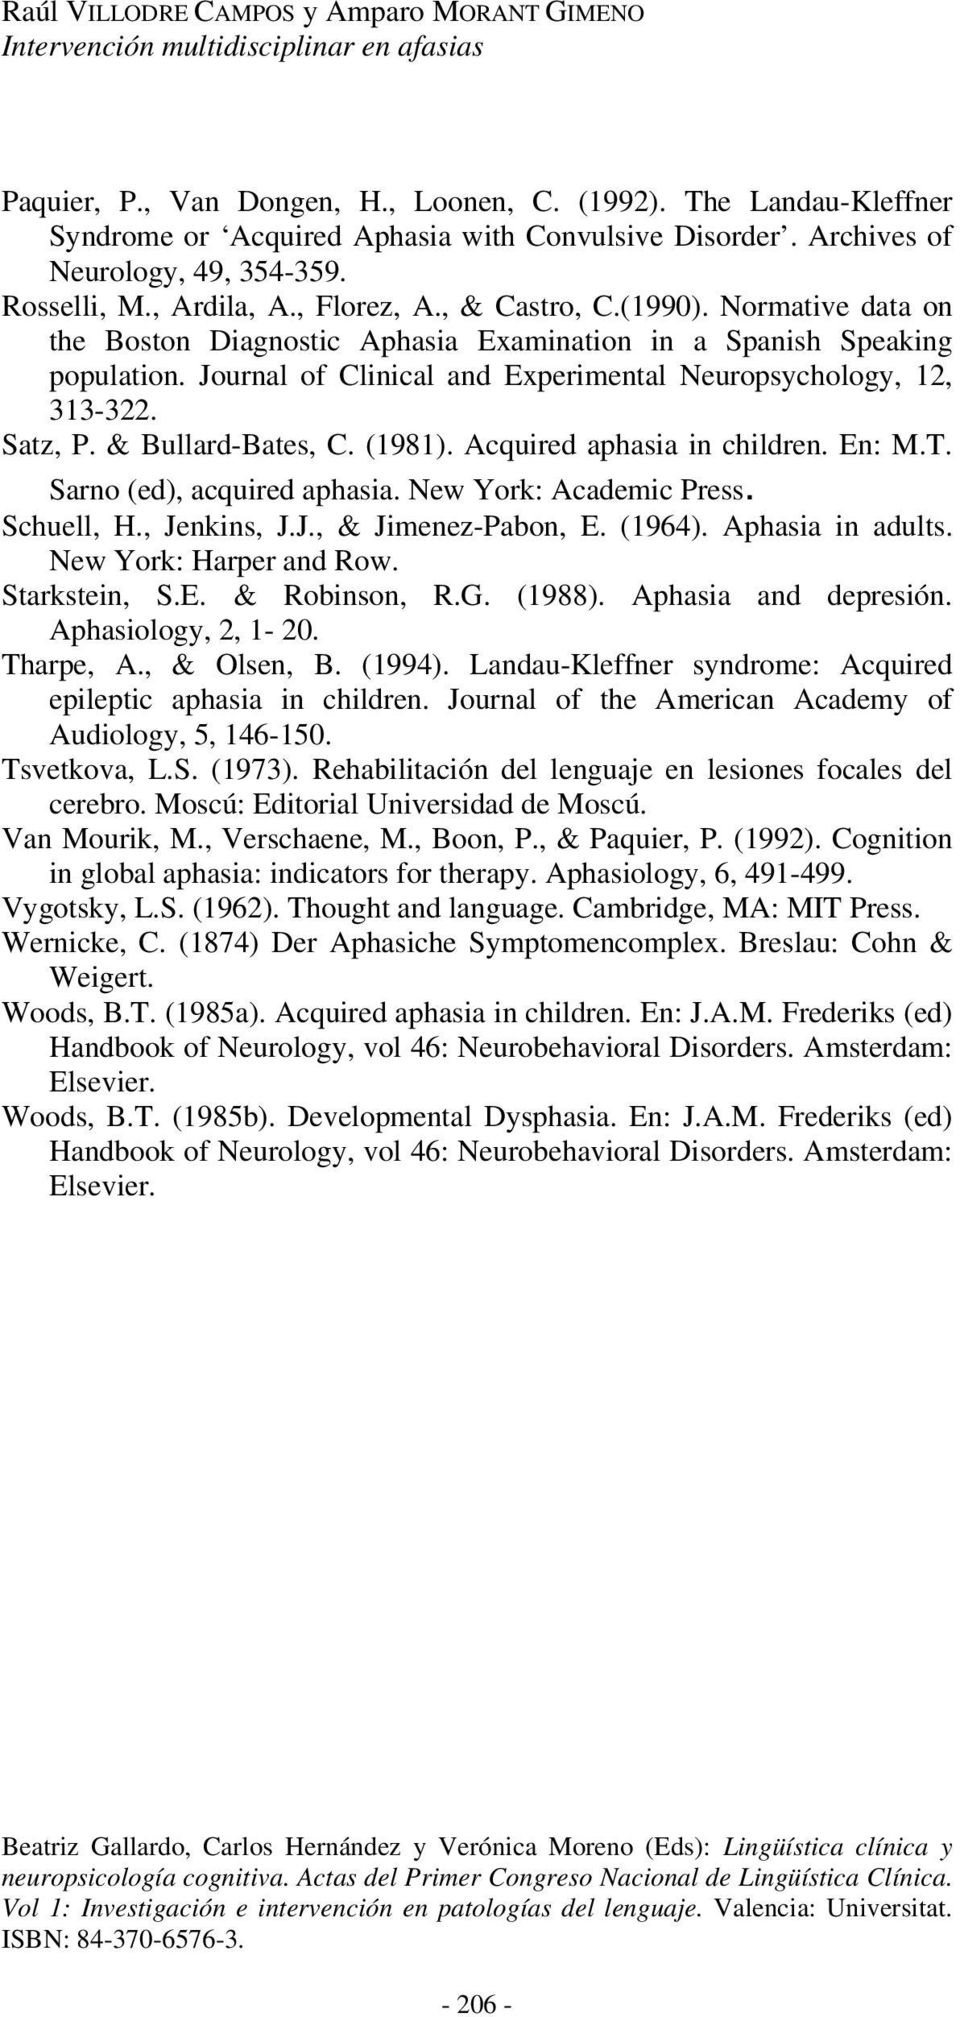 & Bullard-Bates, C. (1981). Acquired aphasia in children. En: M.T. Sarno (ed), acquired aphasia. New York: Academic Press. Schuell, H., Jenkins, J.J., & Jimenez-Pabon, E. (1964). Aphasia in adults.